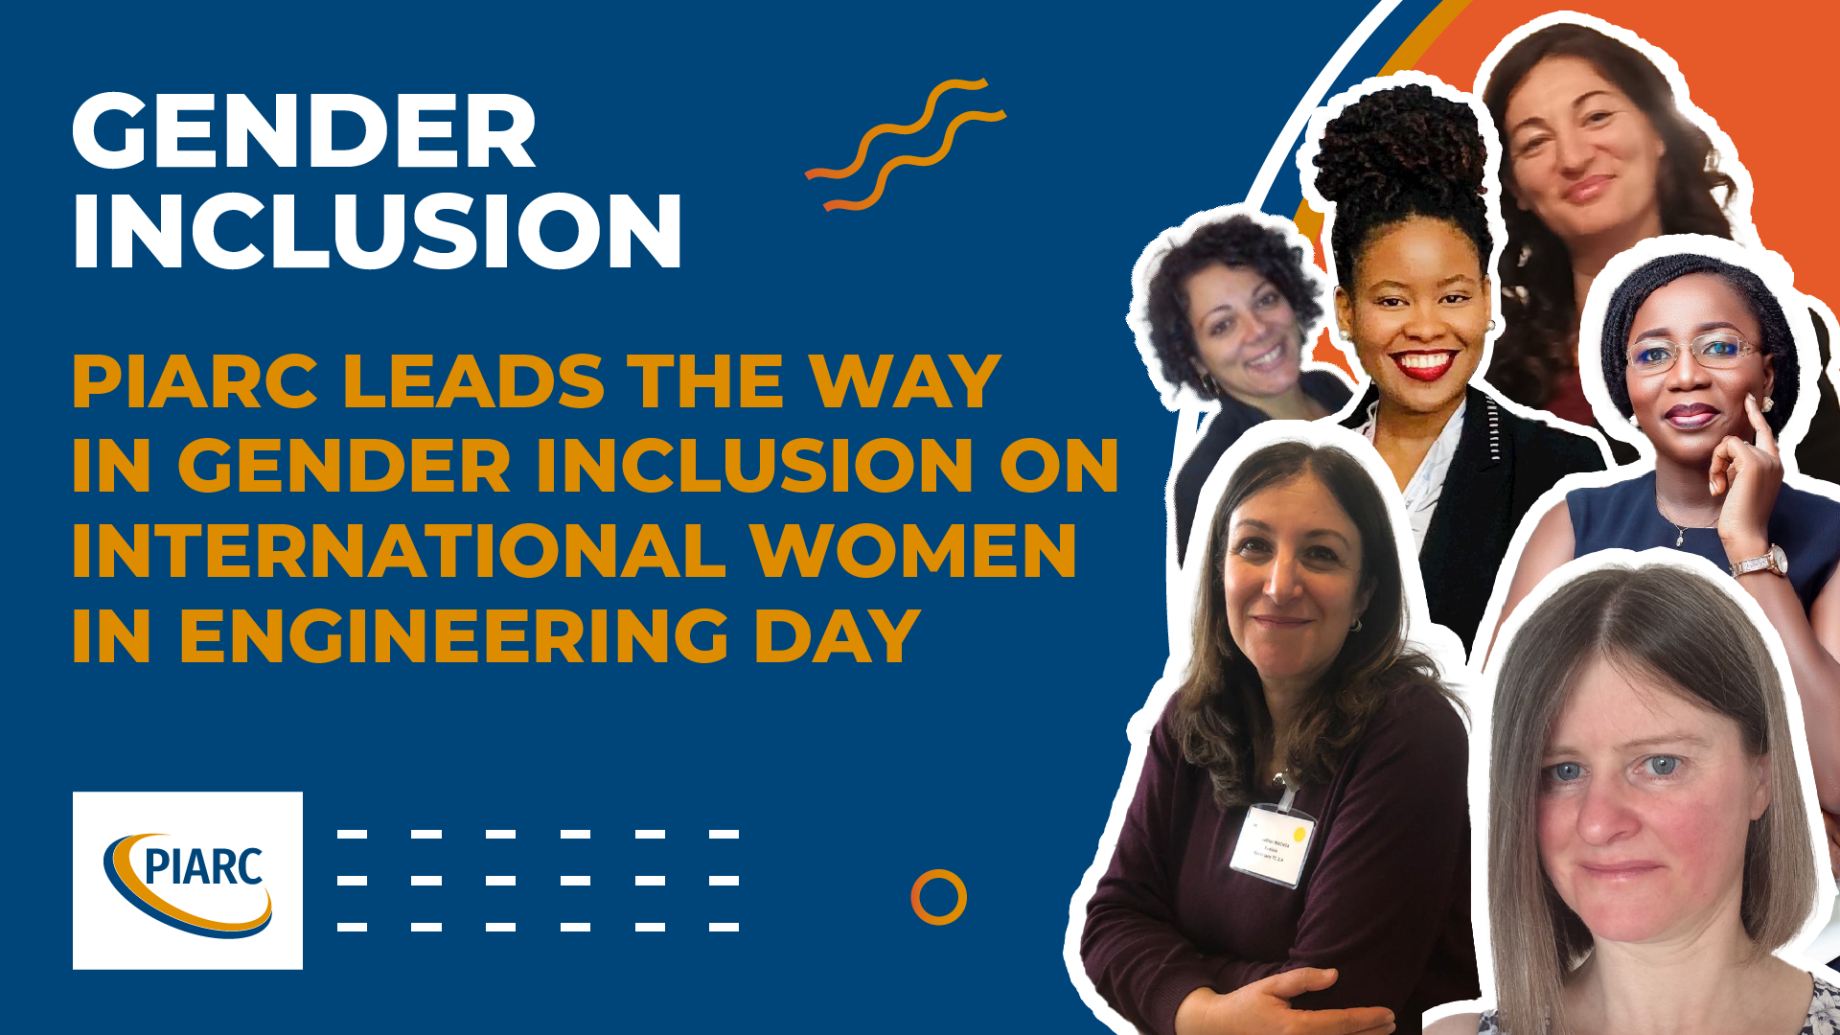 PIARC leads the way in gender inclusion on International Women in Engineering Day